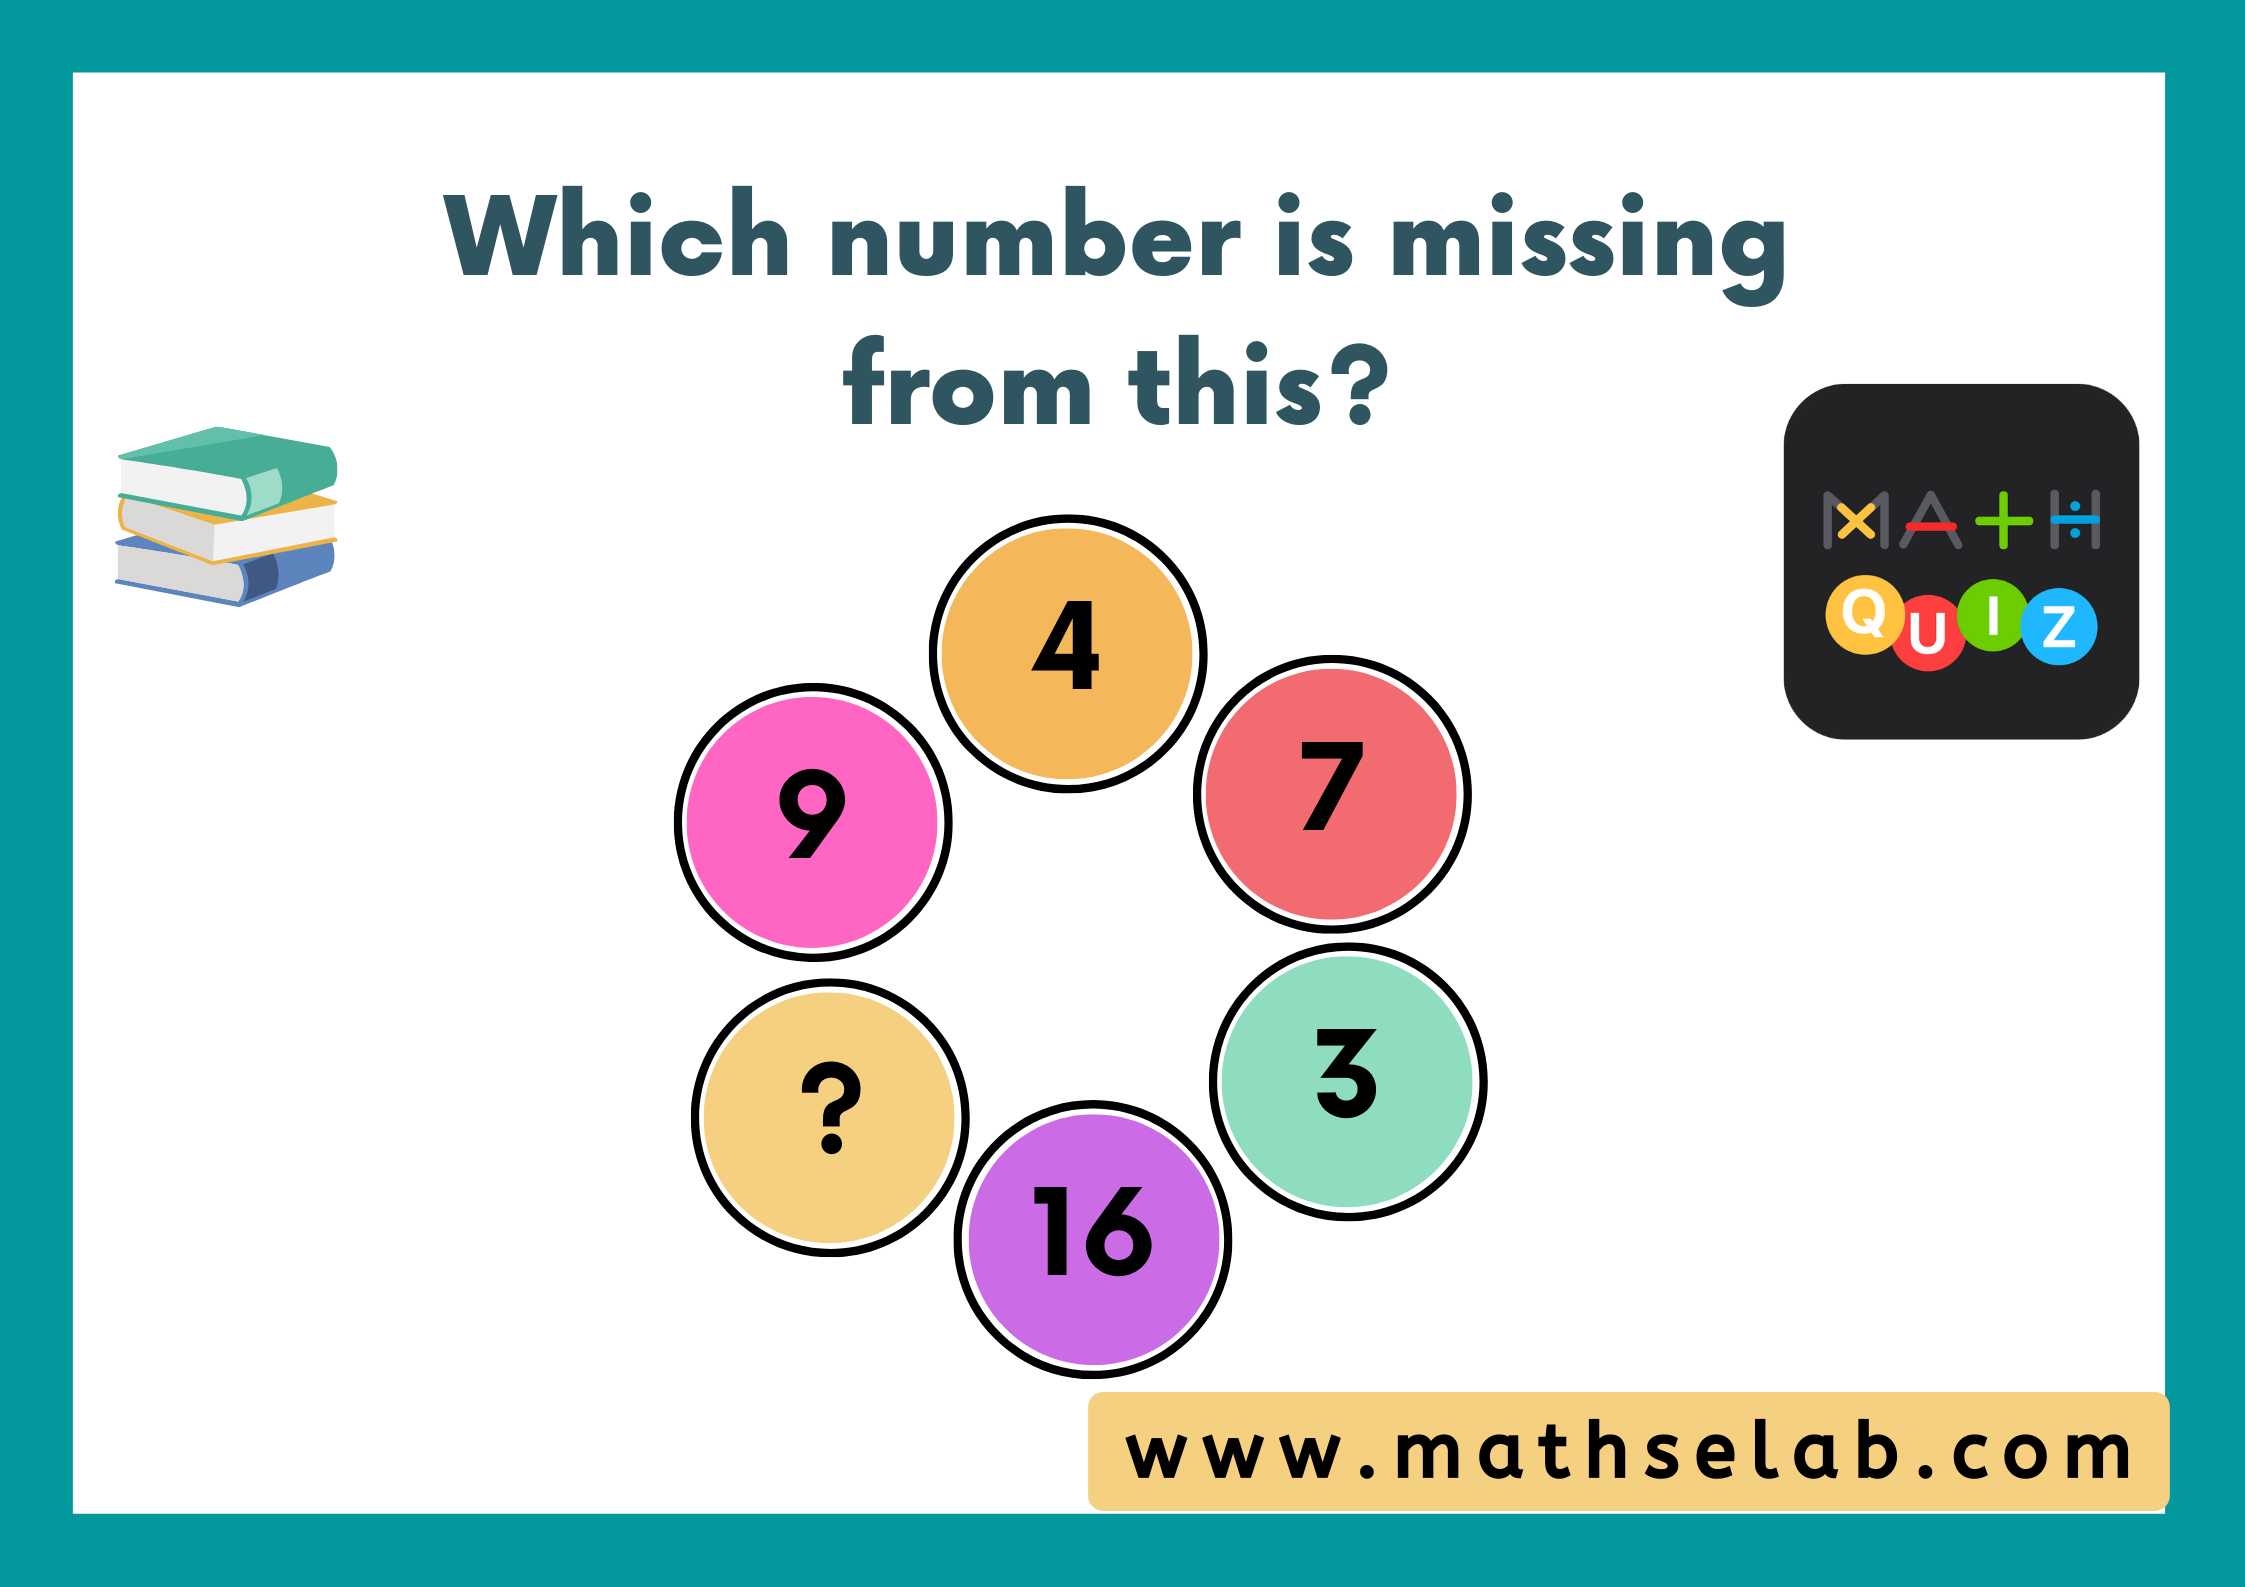 Which number is missing from this?